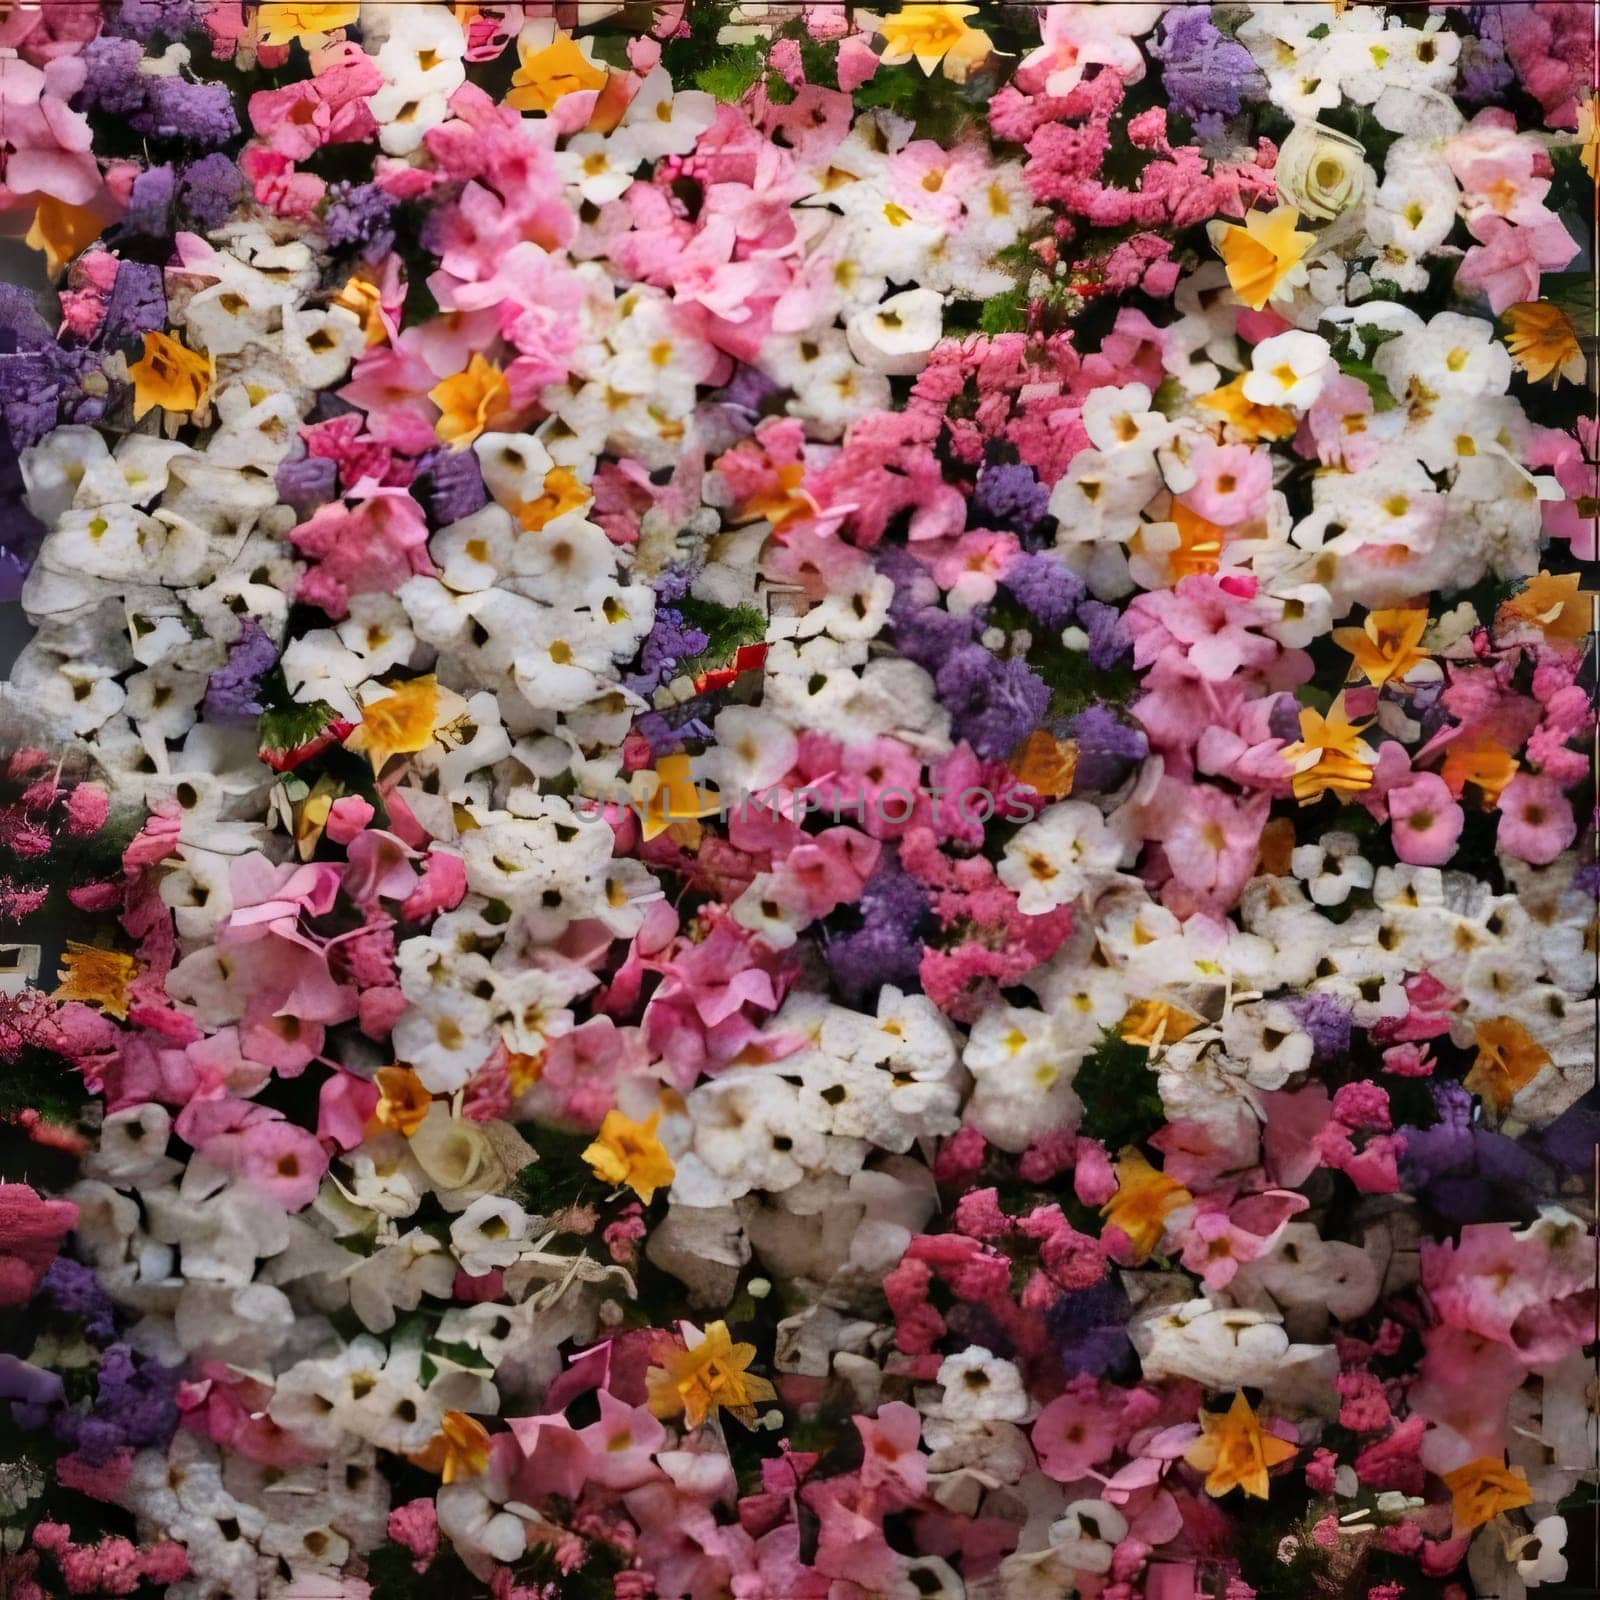 Top view of hundreds of colorful pink, white yellow flowers. Flowering flowers, a symbol of spring, new life. by ThemesS